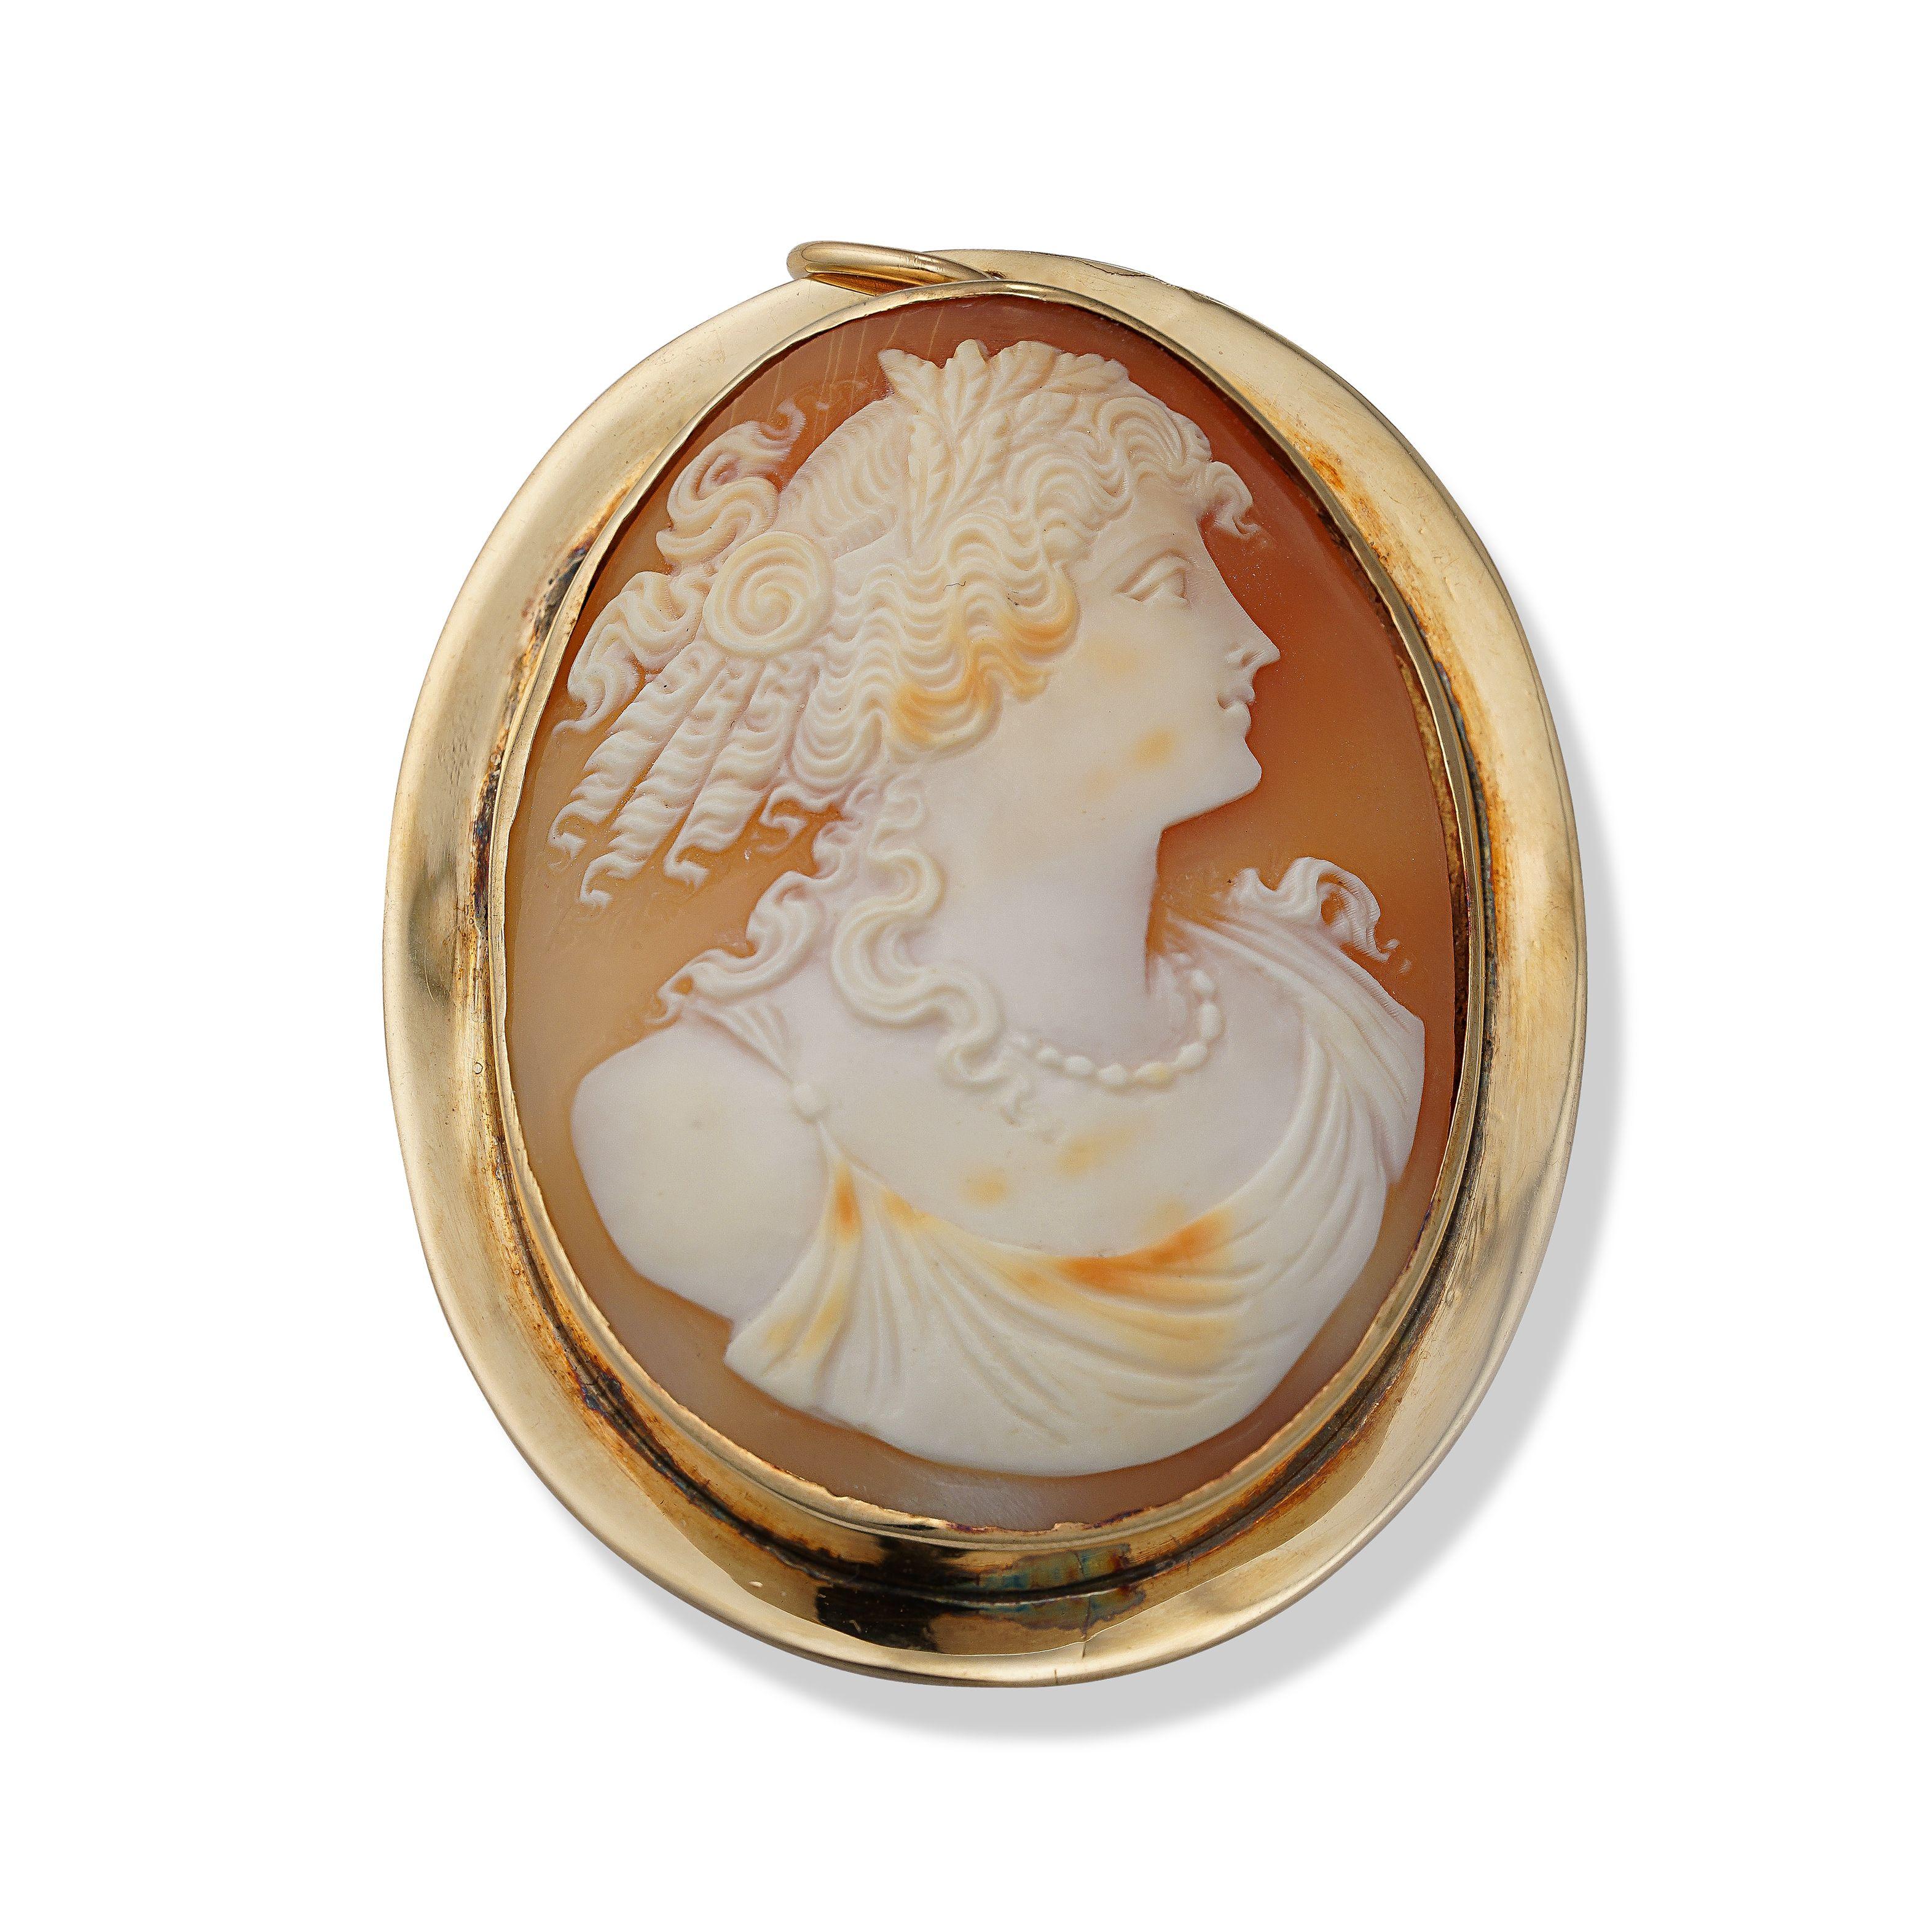 Simply Beautiful! Antique Cameo Brooch Pendant depicting a Beautiful Young Woman. The Hand Carved Oval Cameo is securely set in a Hand crafted 14K yellow Gold bezel mounting. Stamped: 14K. Versatile, the cameo can be worn as a pin or pendant.